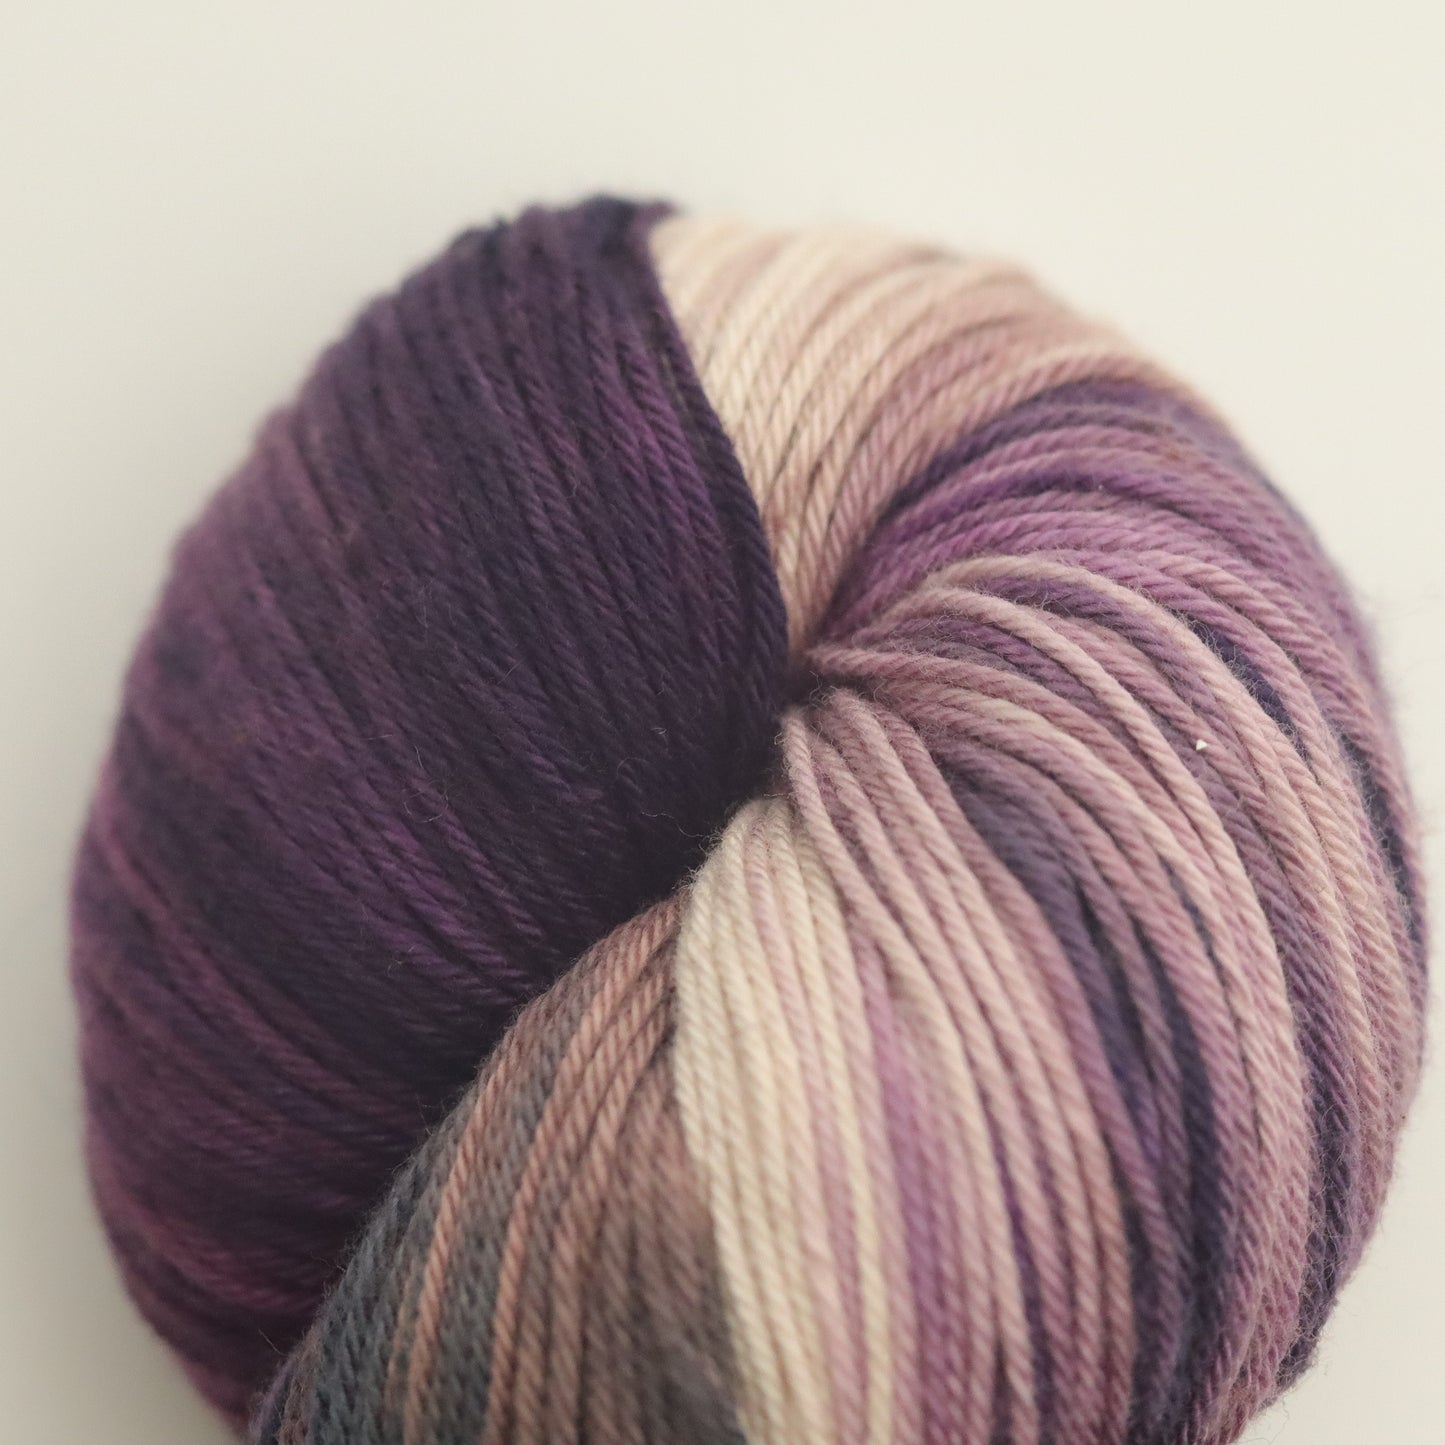 Peacock Yarn Sport Cotton | Assorted Purples | Hand Dyed 100% Cotton Yarn